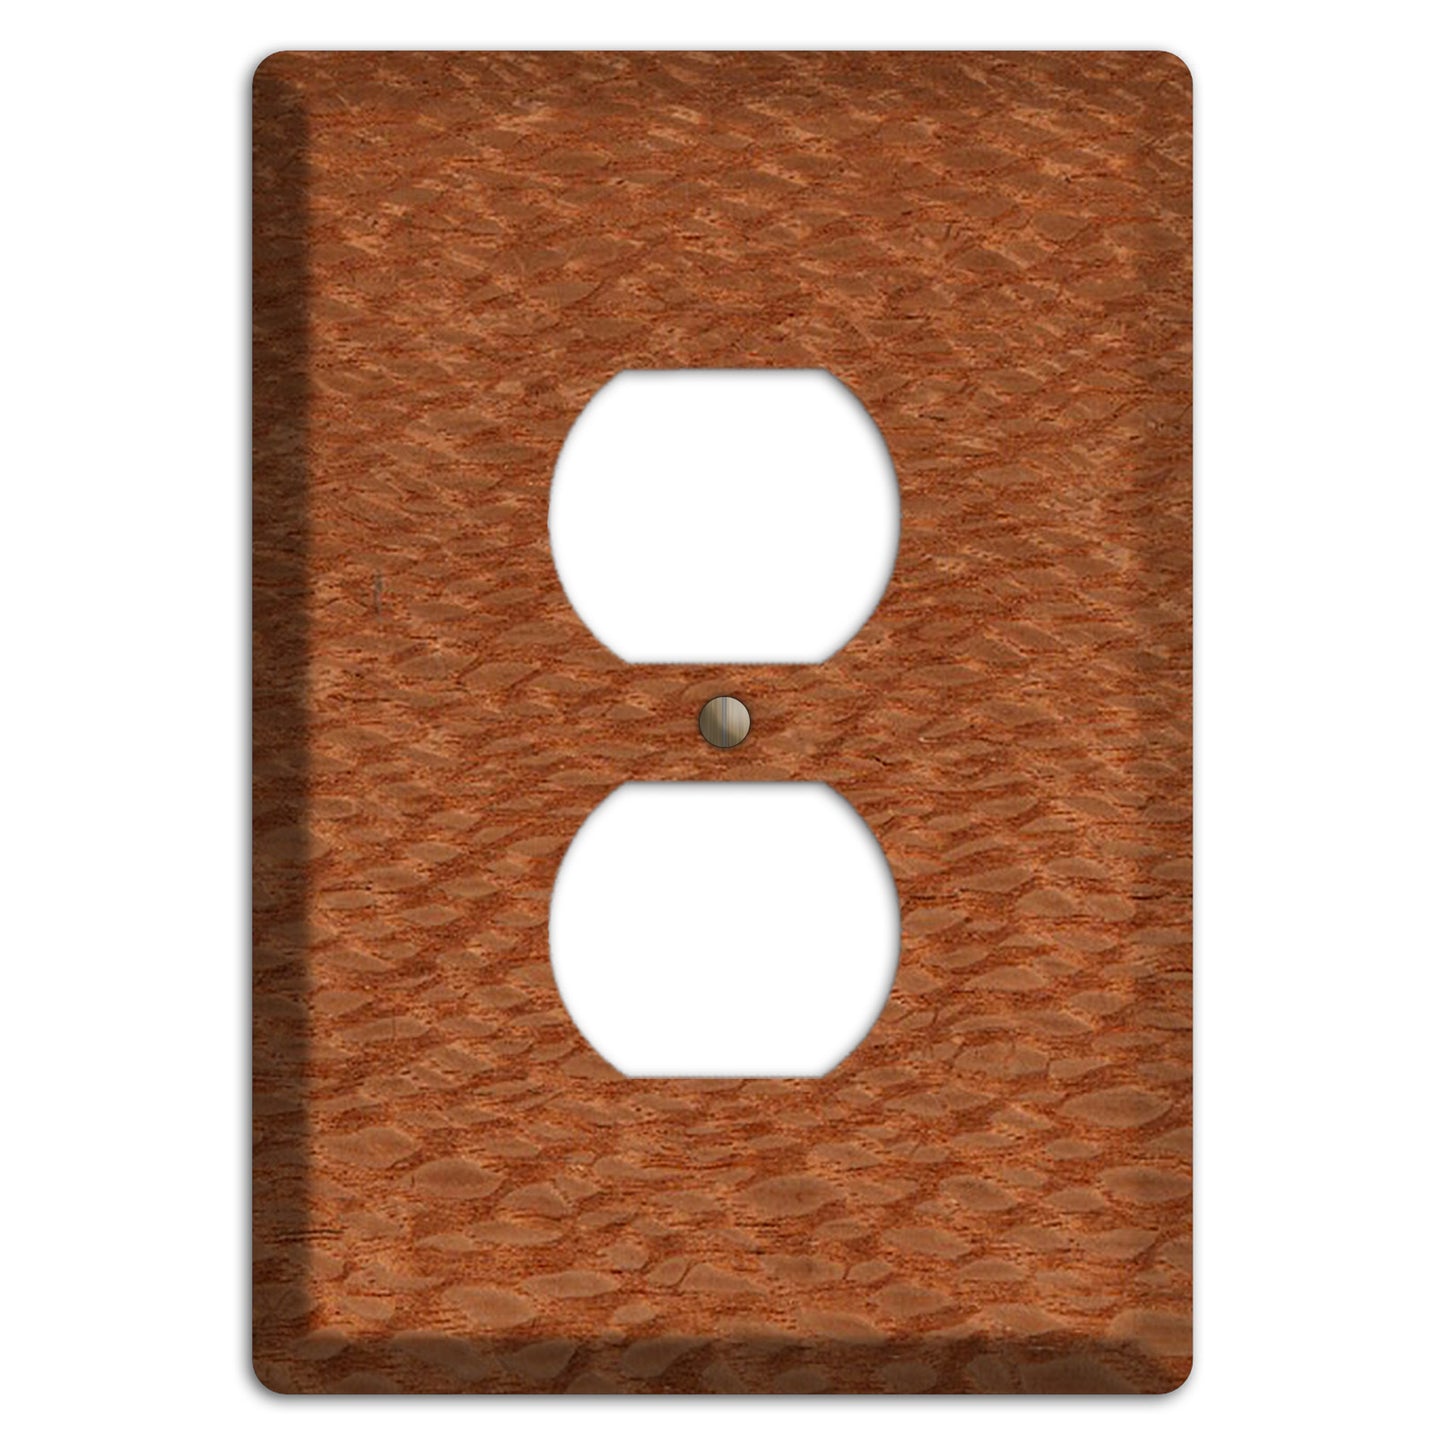 Lacewood Wood Duplex Outlet Cover Plate